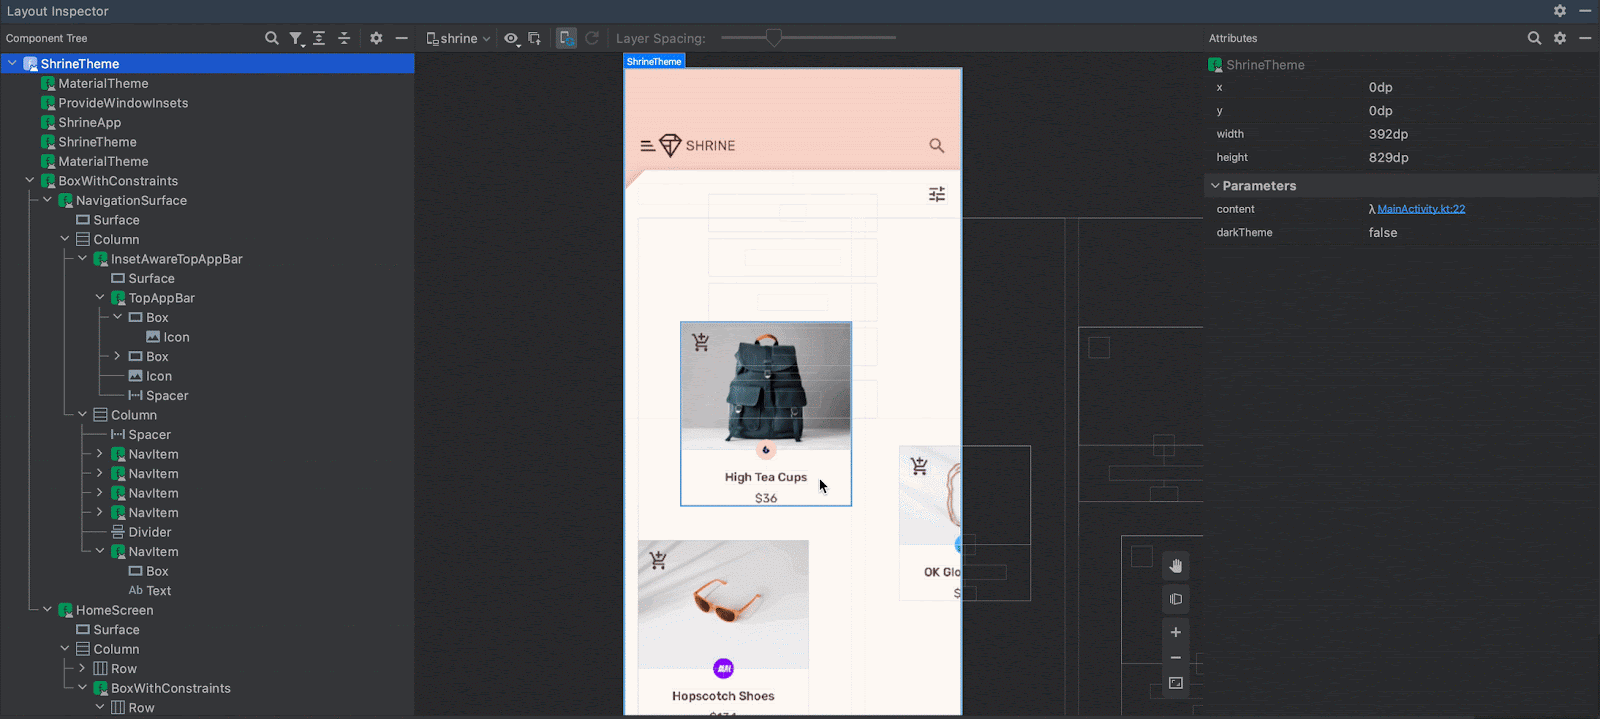 Compose Layout Inspector